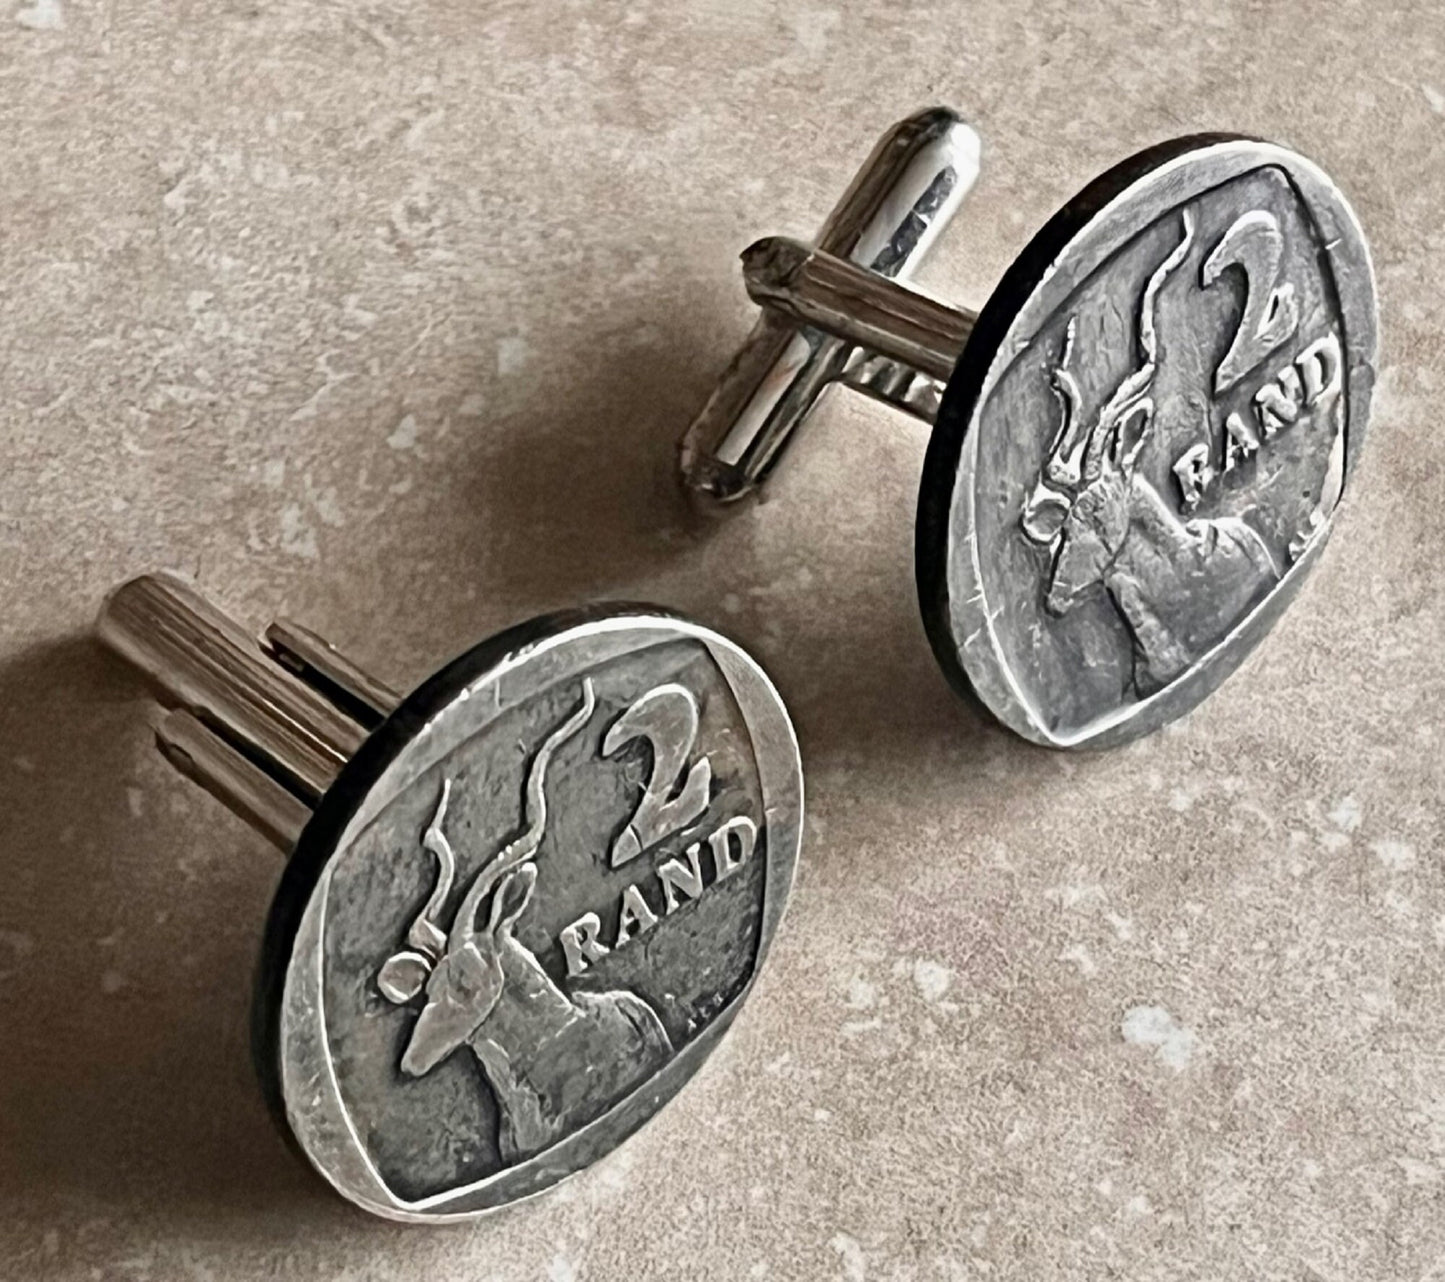 South Africa Coin Cuff Links Africa 2 Rand Personal Cufflinks Handmade Jewelry Gift Friend Charm For Him Her World Coin Collector